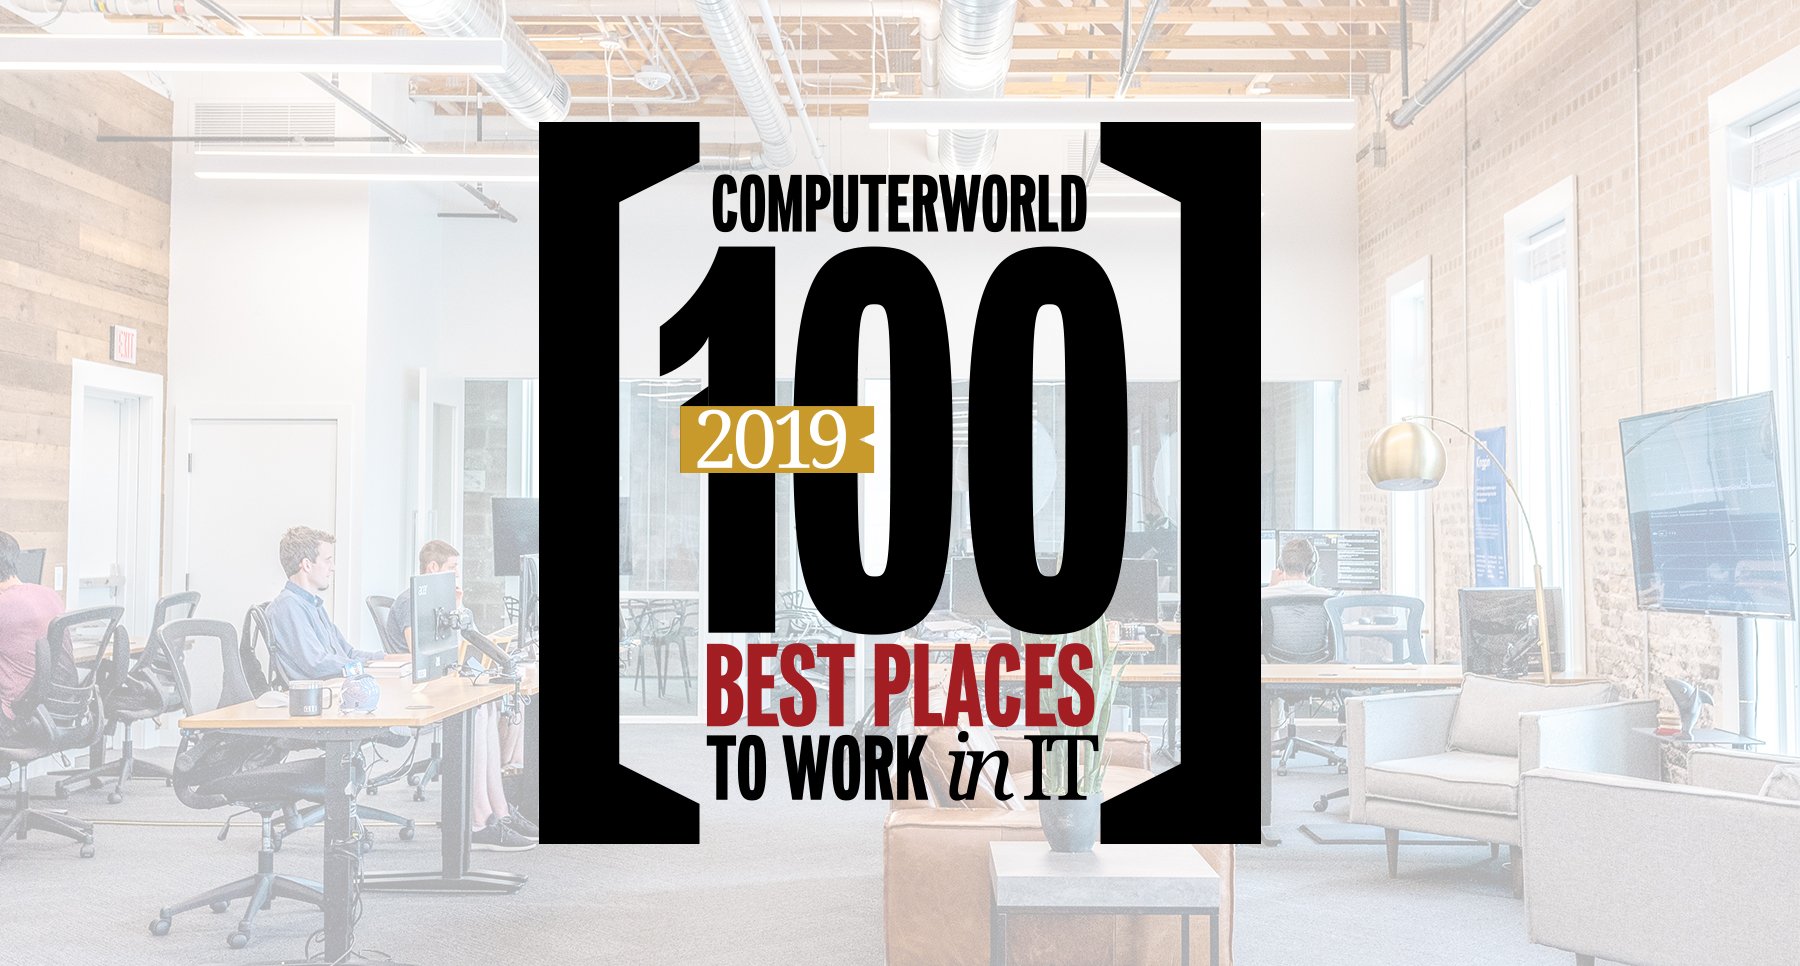 Sev1Tech Recognized as Top Place to Work in IT by IDG’s Computerworld for the 6th Year in a Row!